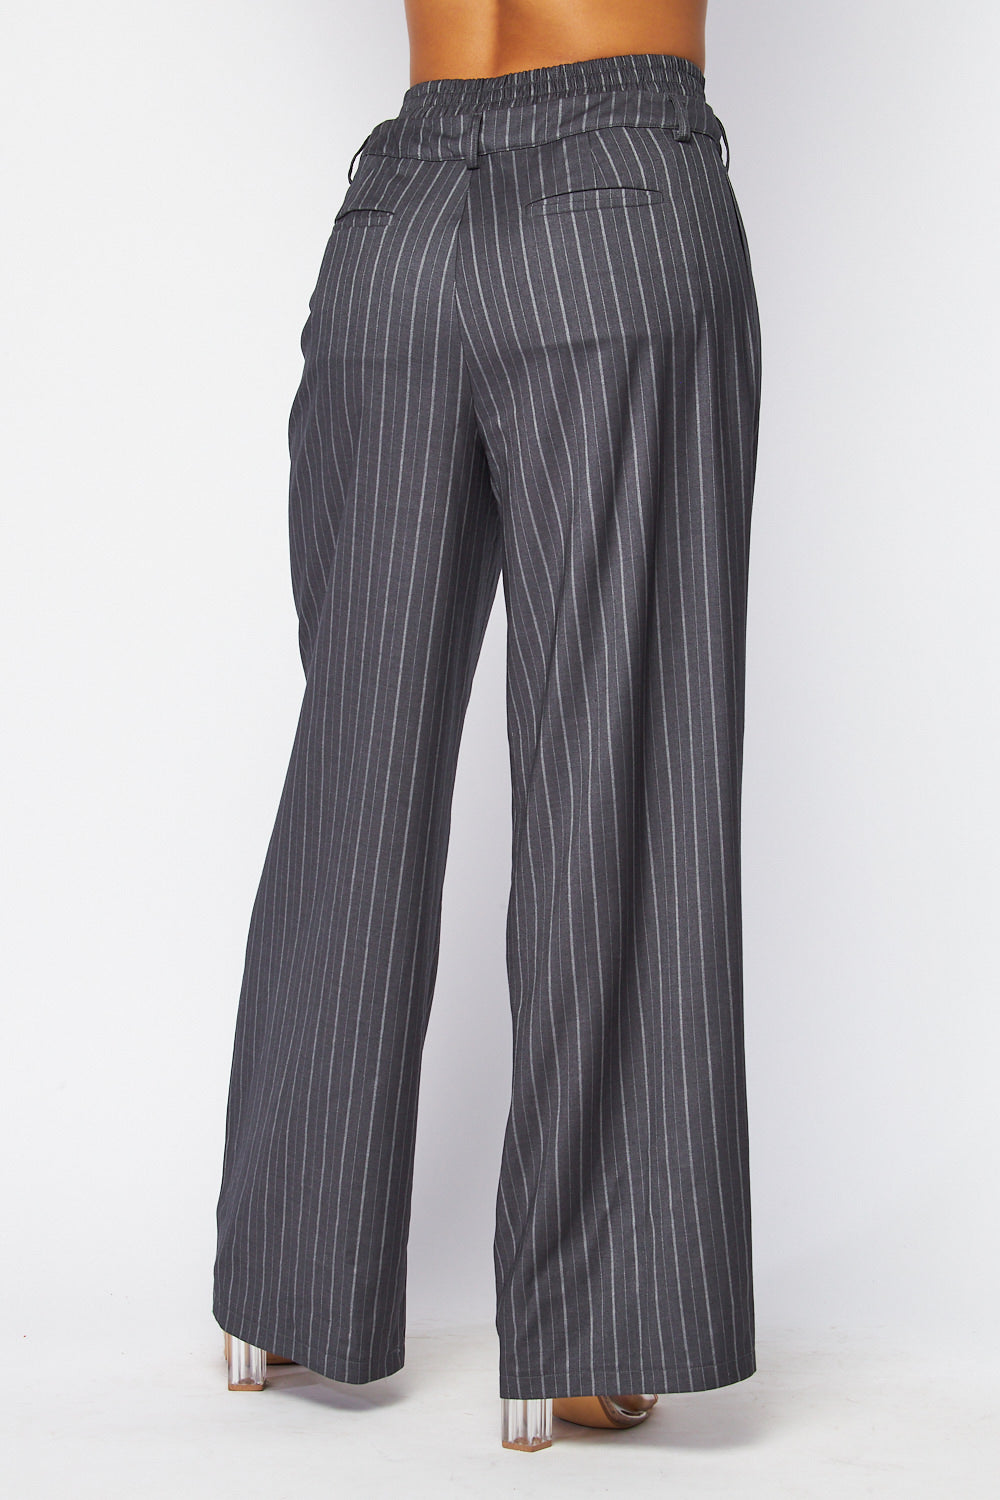 Polly Pin Stripe Exposed Waistband Wide Leg Pants